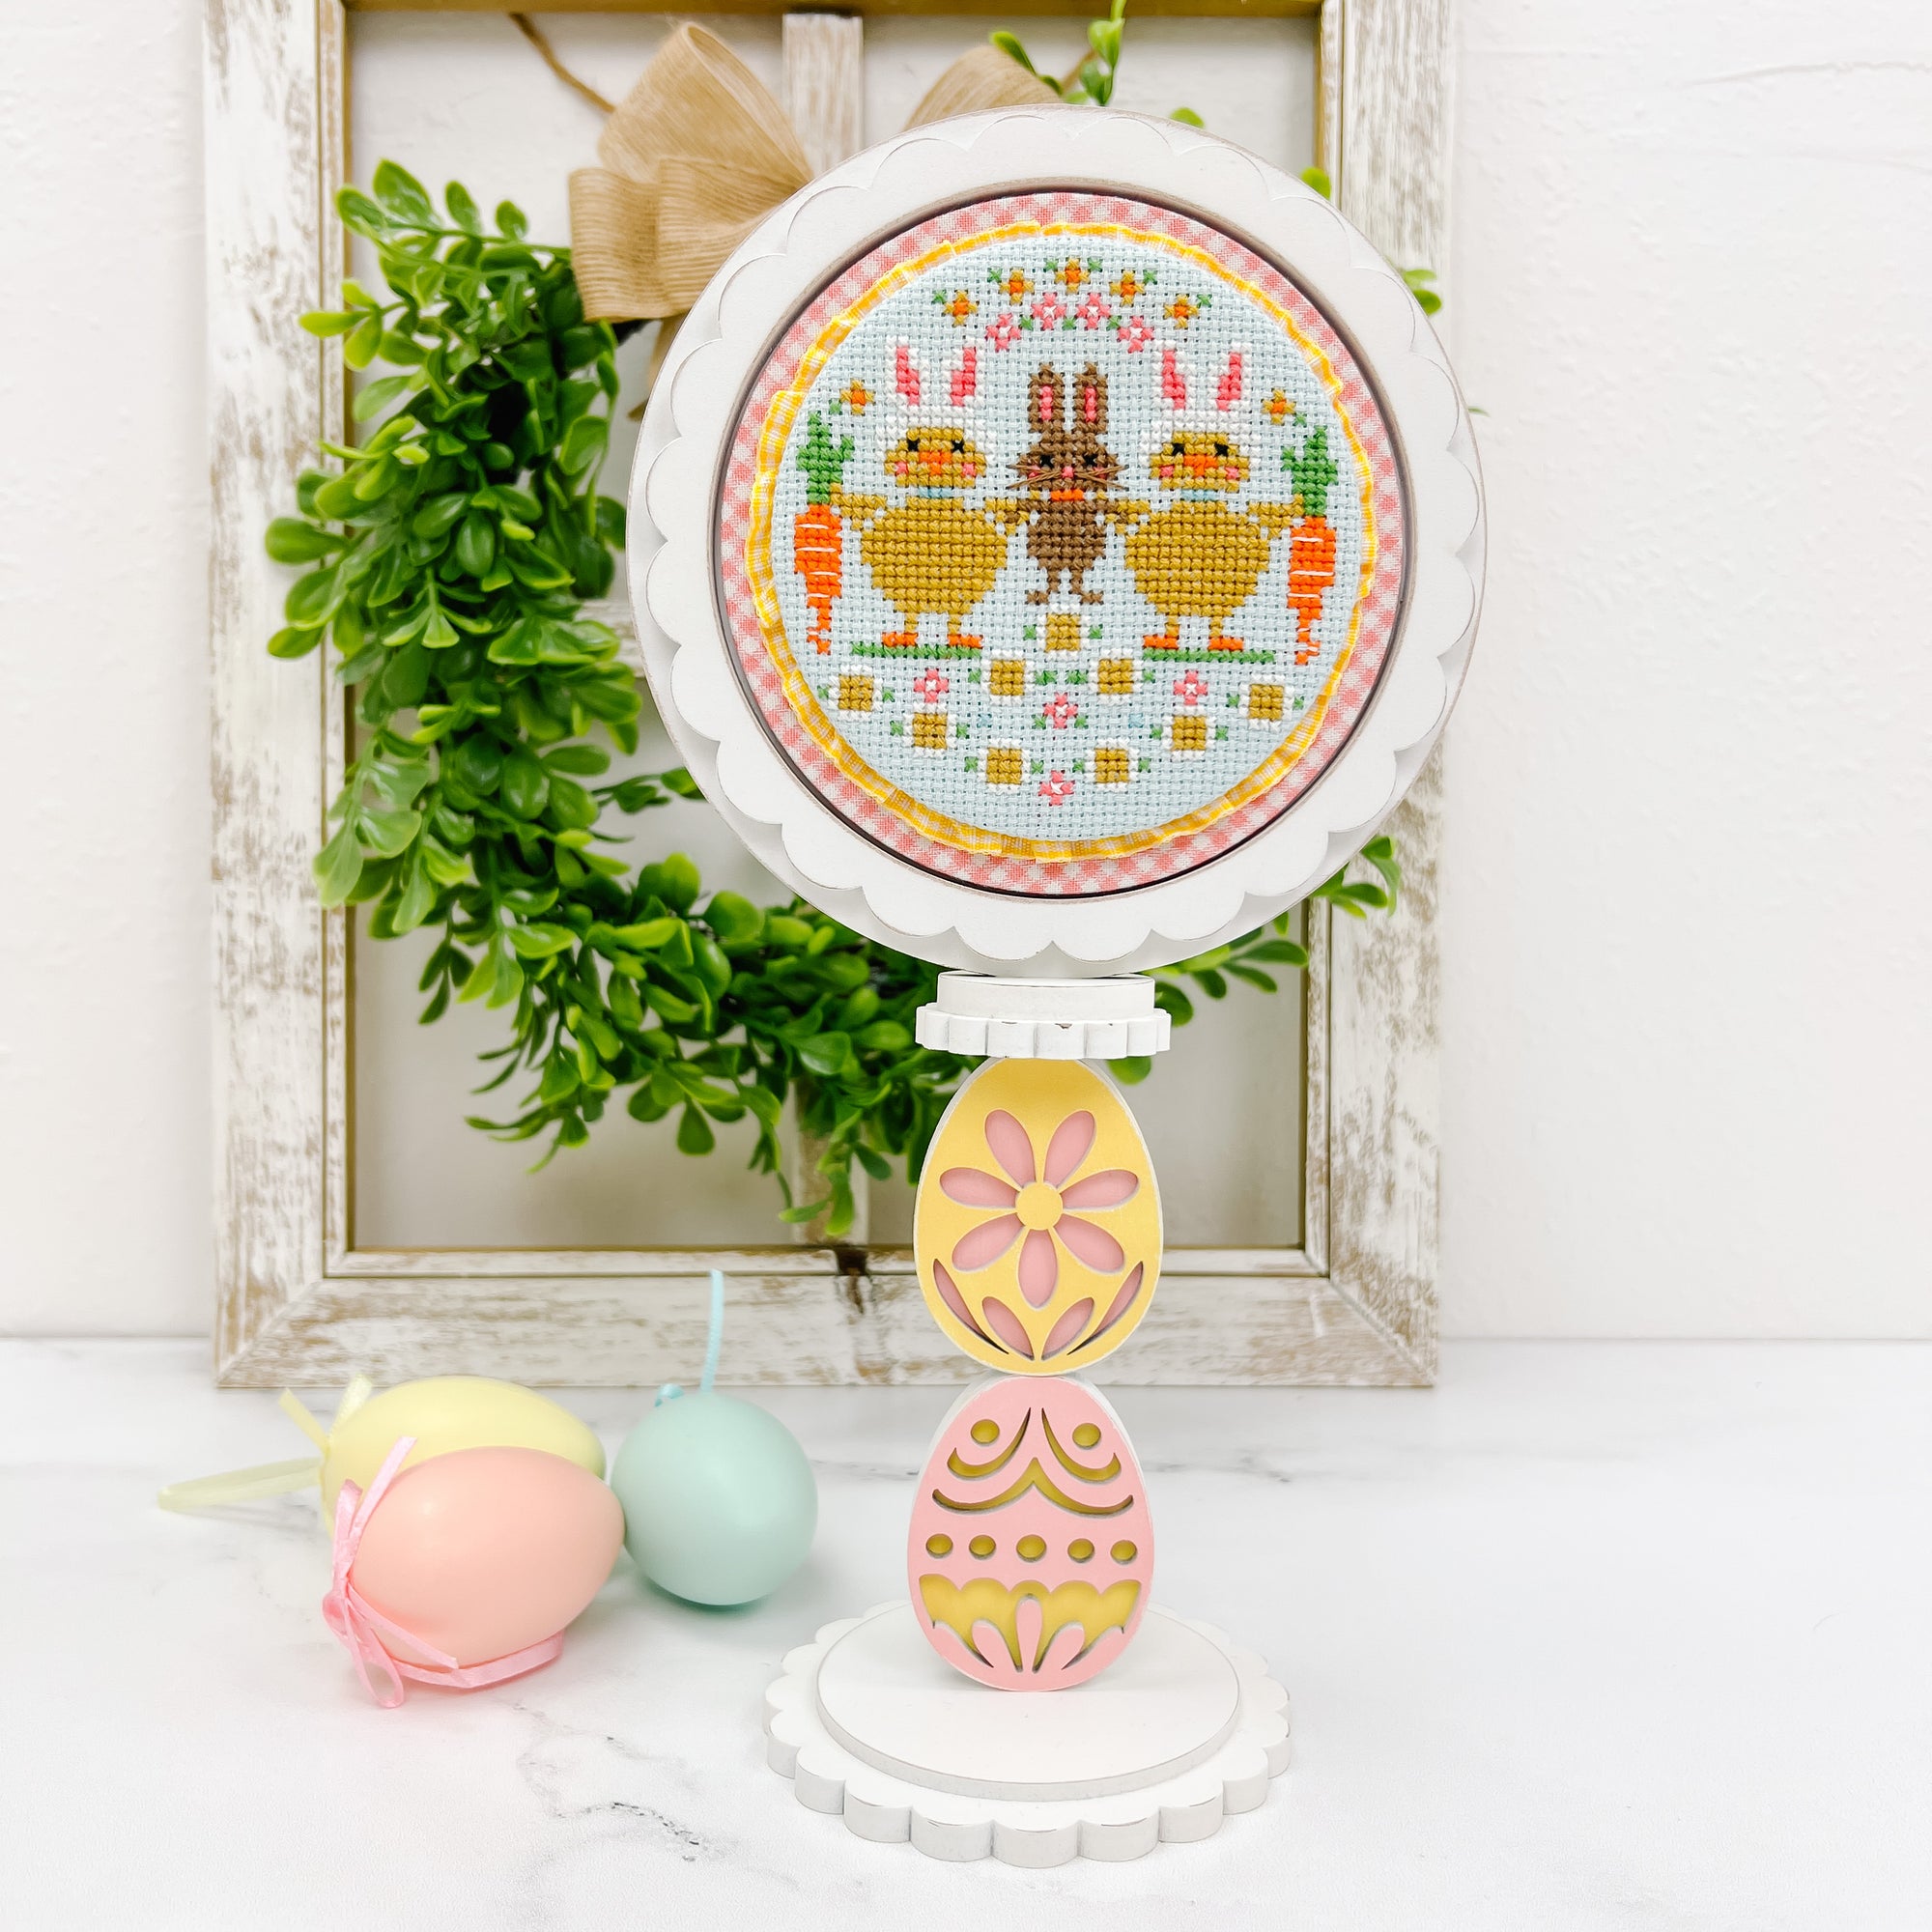 Round cross stitch display on an egg shaped pedestal with a finished Easter cross stitch by Stitching with the Housewives.